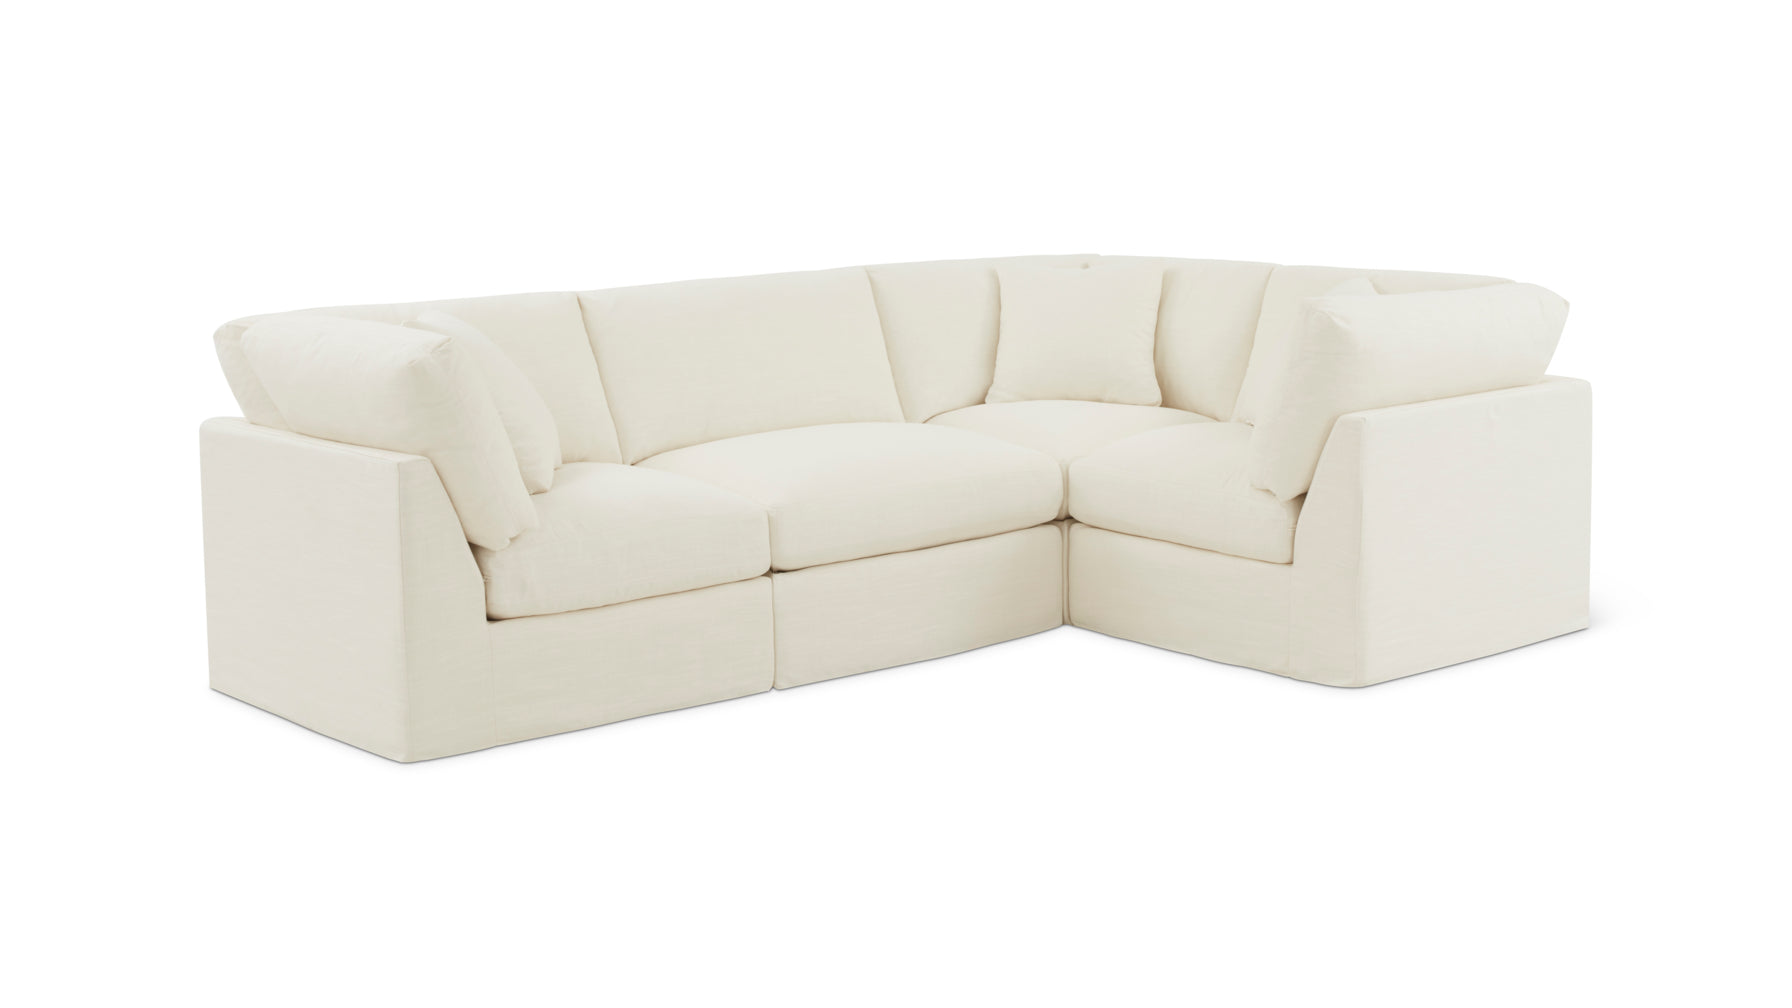 Get Together™ 4-Piece Modular Sectional Closed, Standard, Cream Linen - Image 2